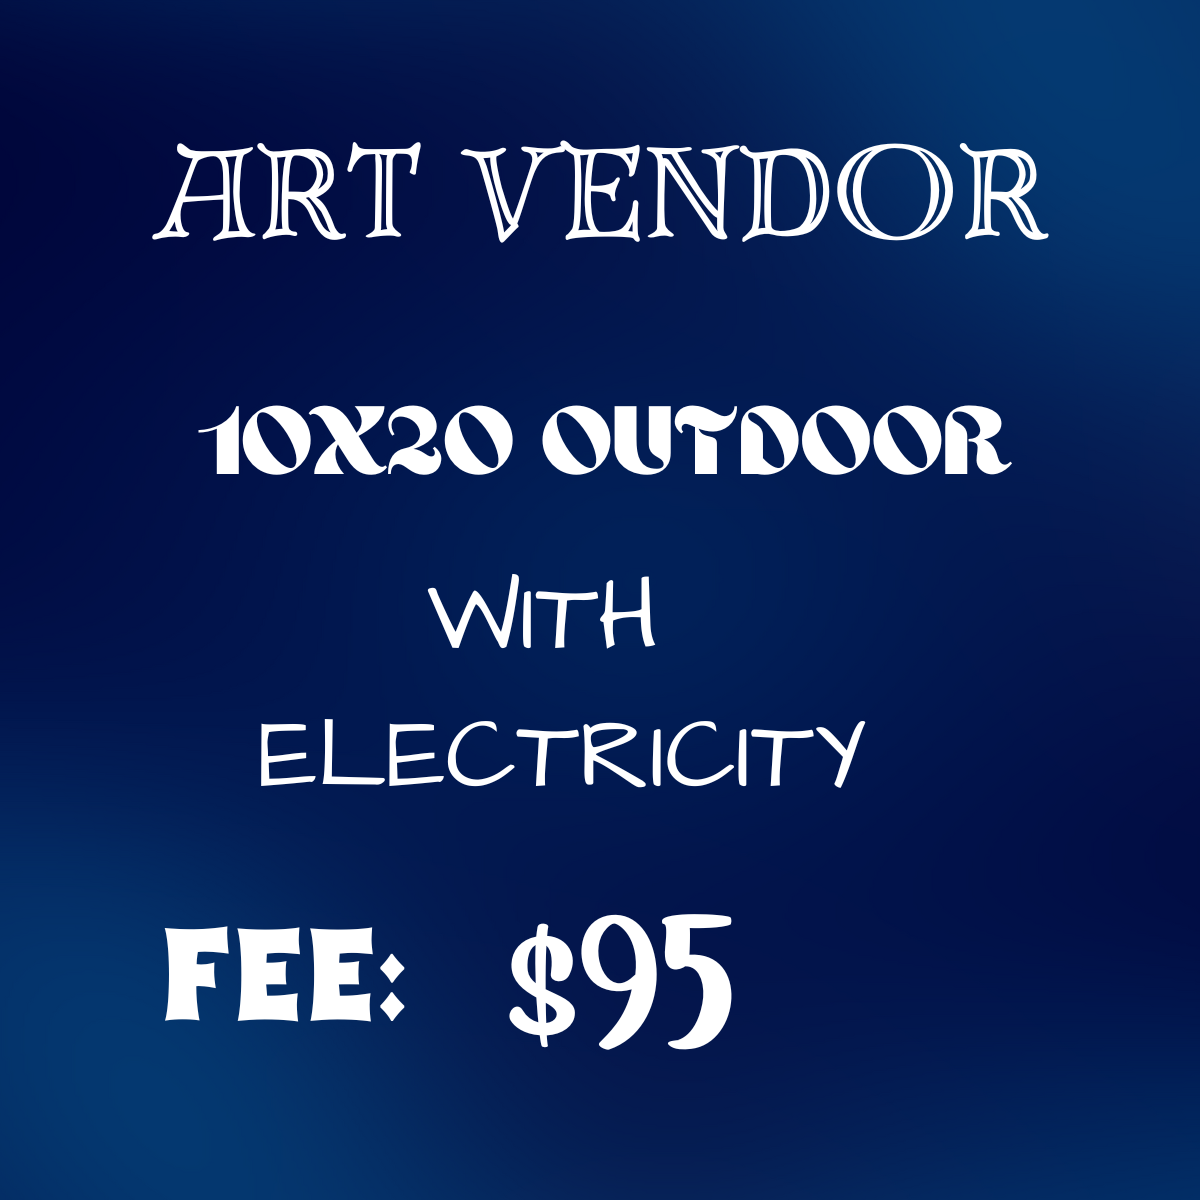 Artist's Bash 10x20, WITH ELECTRICITY, OUTDOOR ART VENDOR SPACE